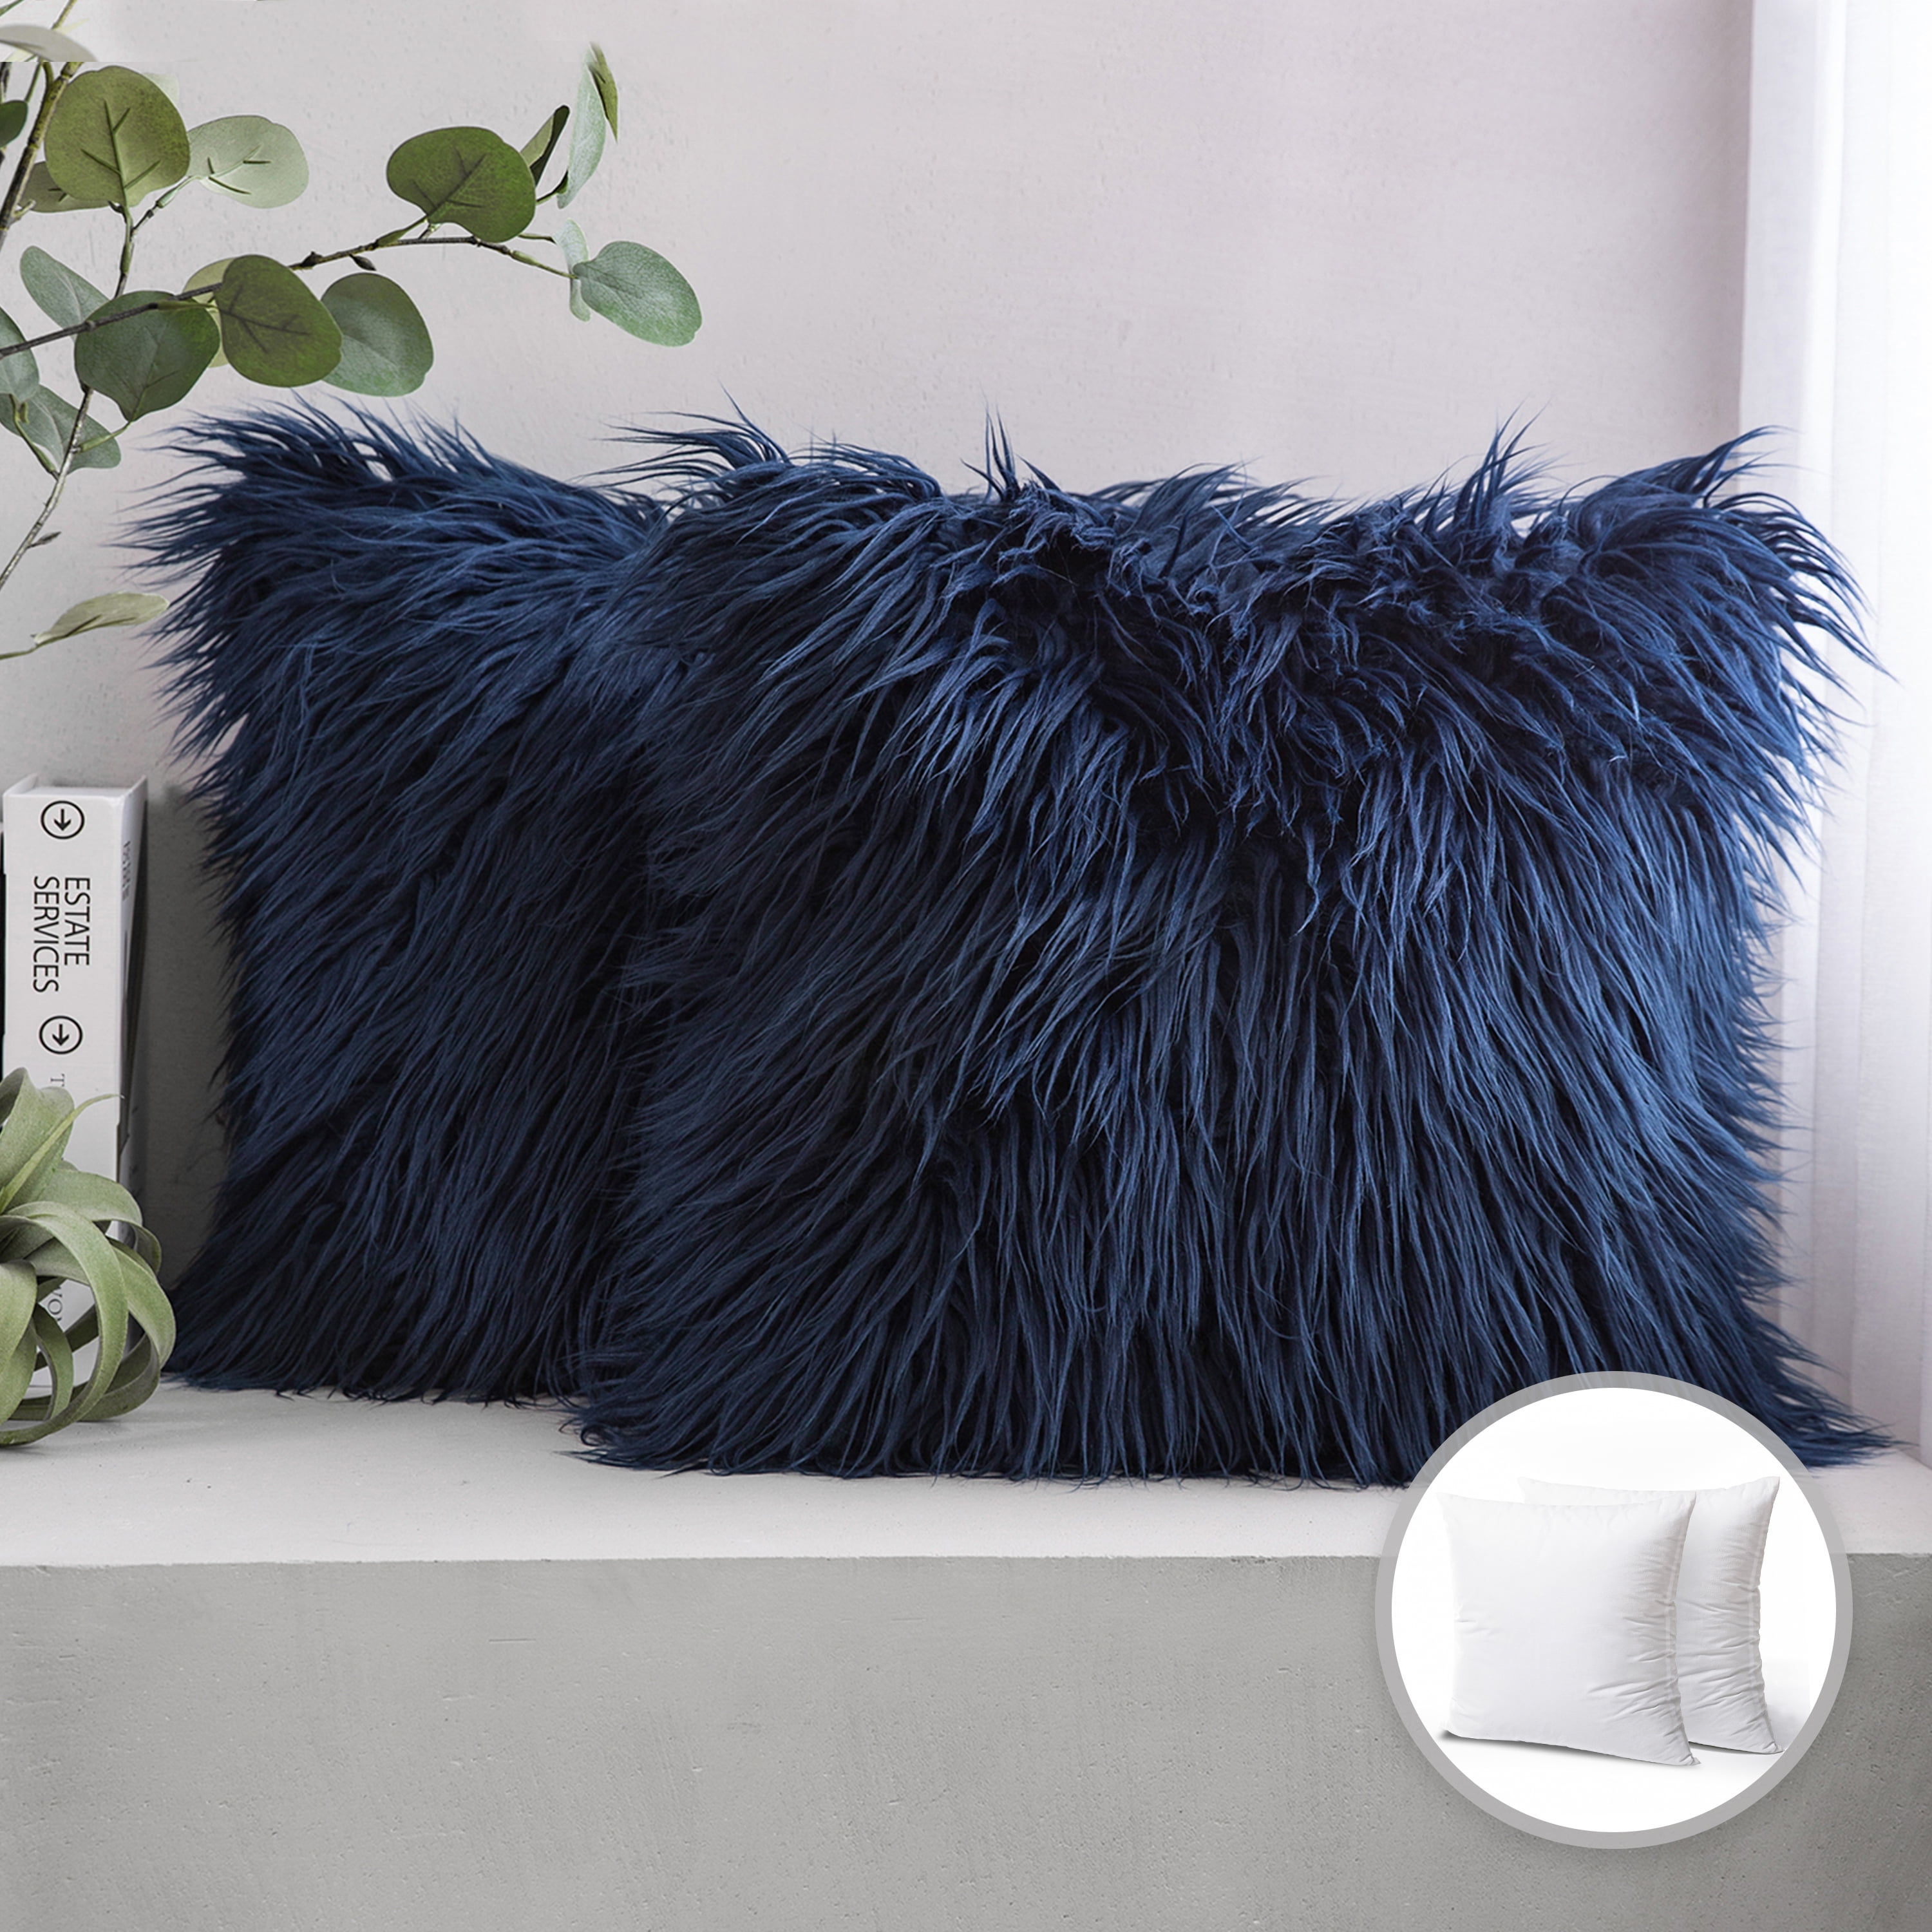 Phantoscope Luxury Mongolian Fluffy Faux Fur Series Square Decorative Throw Pillow Cusion for Couch, 18 inch x 18 inch, Navy Blue, 2 Pack, Size: 18 x